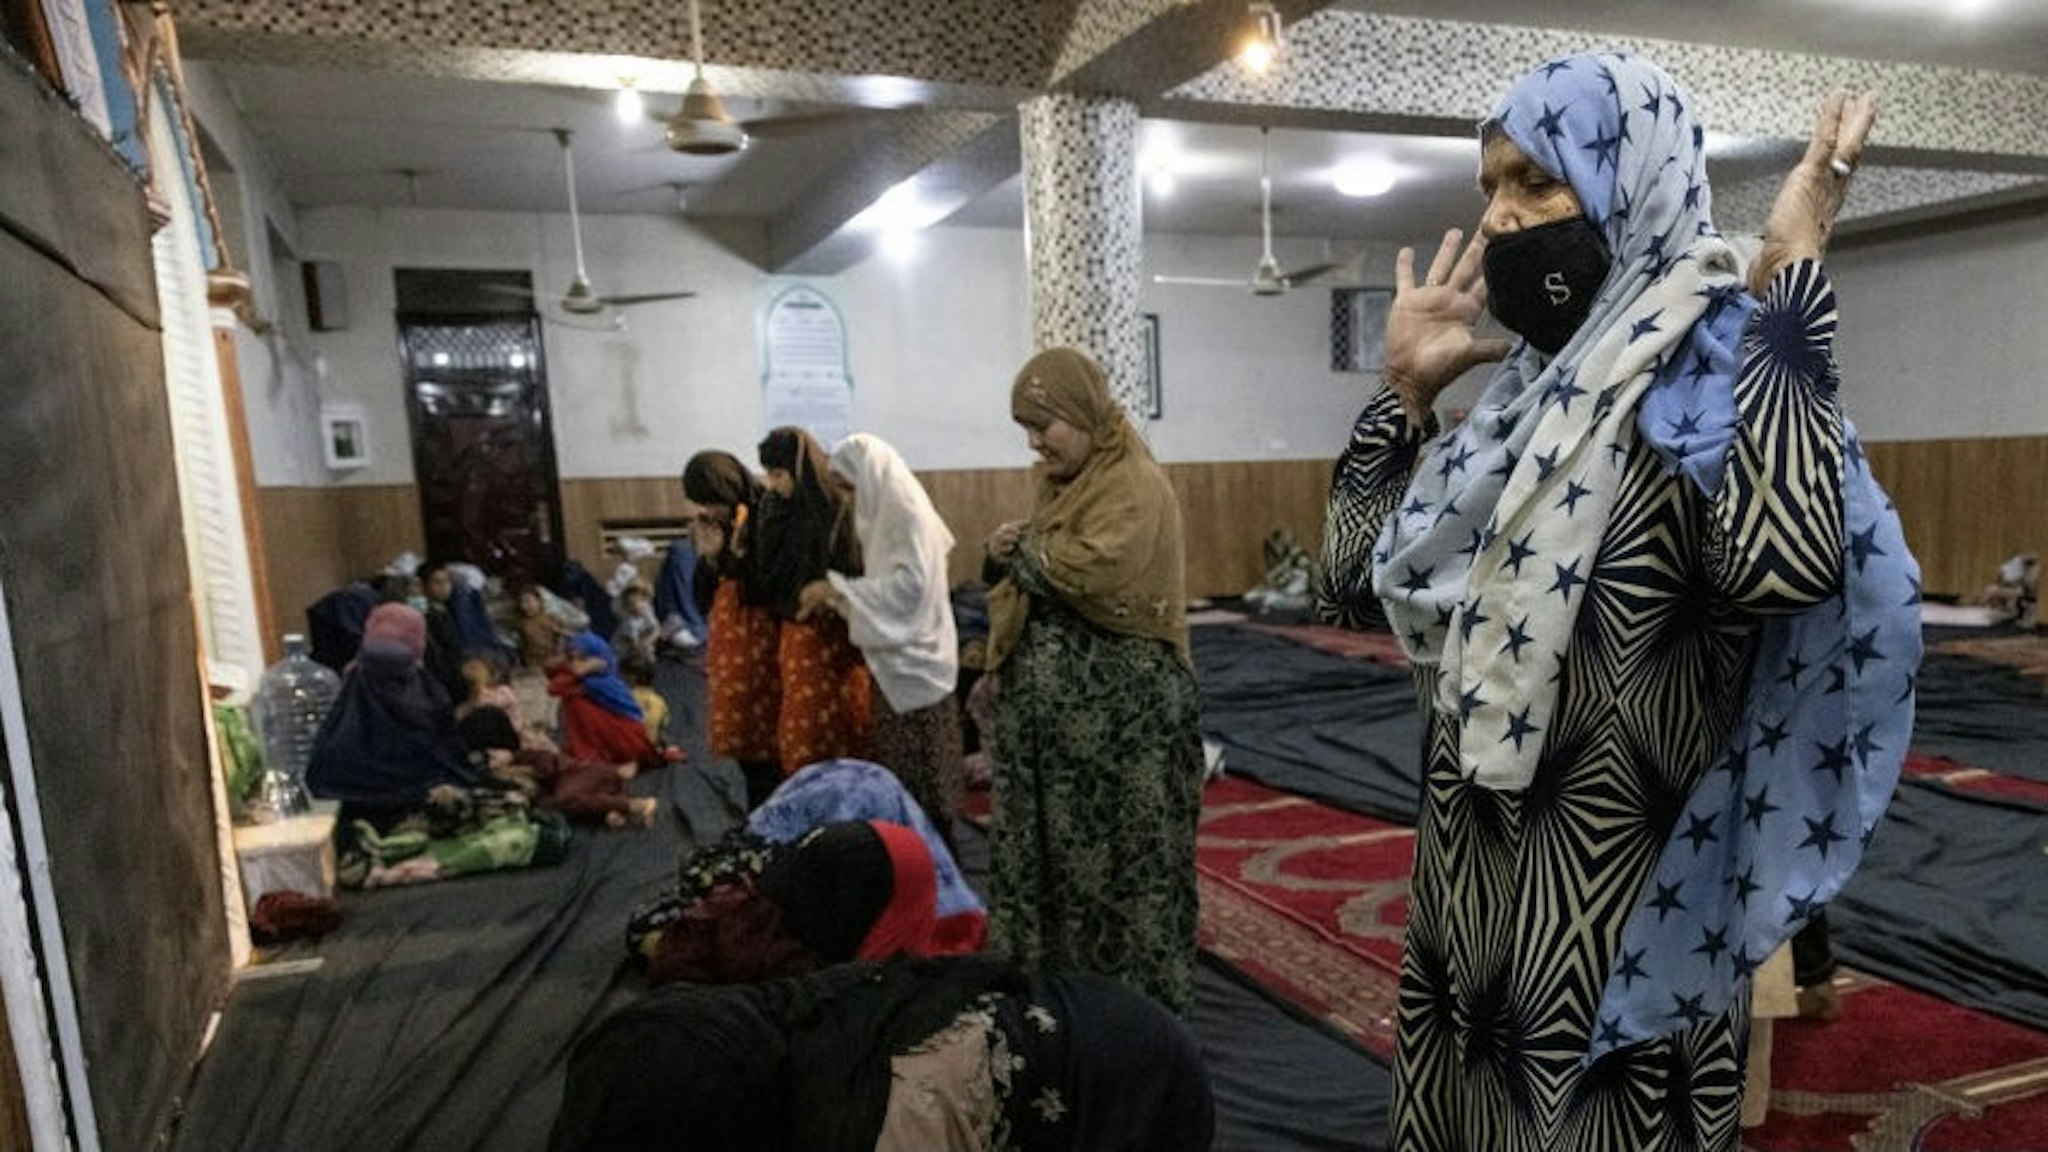 More Displaced Afghans Arrive In Kabul As Taliban Gains Ground KABUL, AFGANISTAN - AUGUST 13 : Displaced Afghan women and children from Kunduz pray at a mosque that is sheltering them on August 13, 2021 in Kabul, Afghanistan. Tensions are high as the Taliban advance on the capital city after taking Herat and the country's second-largest city Kandahar. (Photo by Paula Bronstein /Getty Images) Paula Bronstein / Stringer via Getty Images